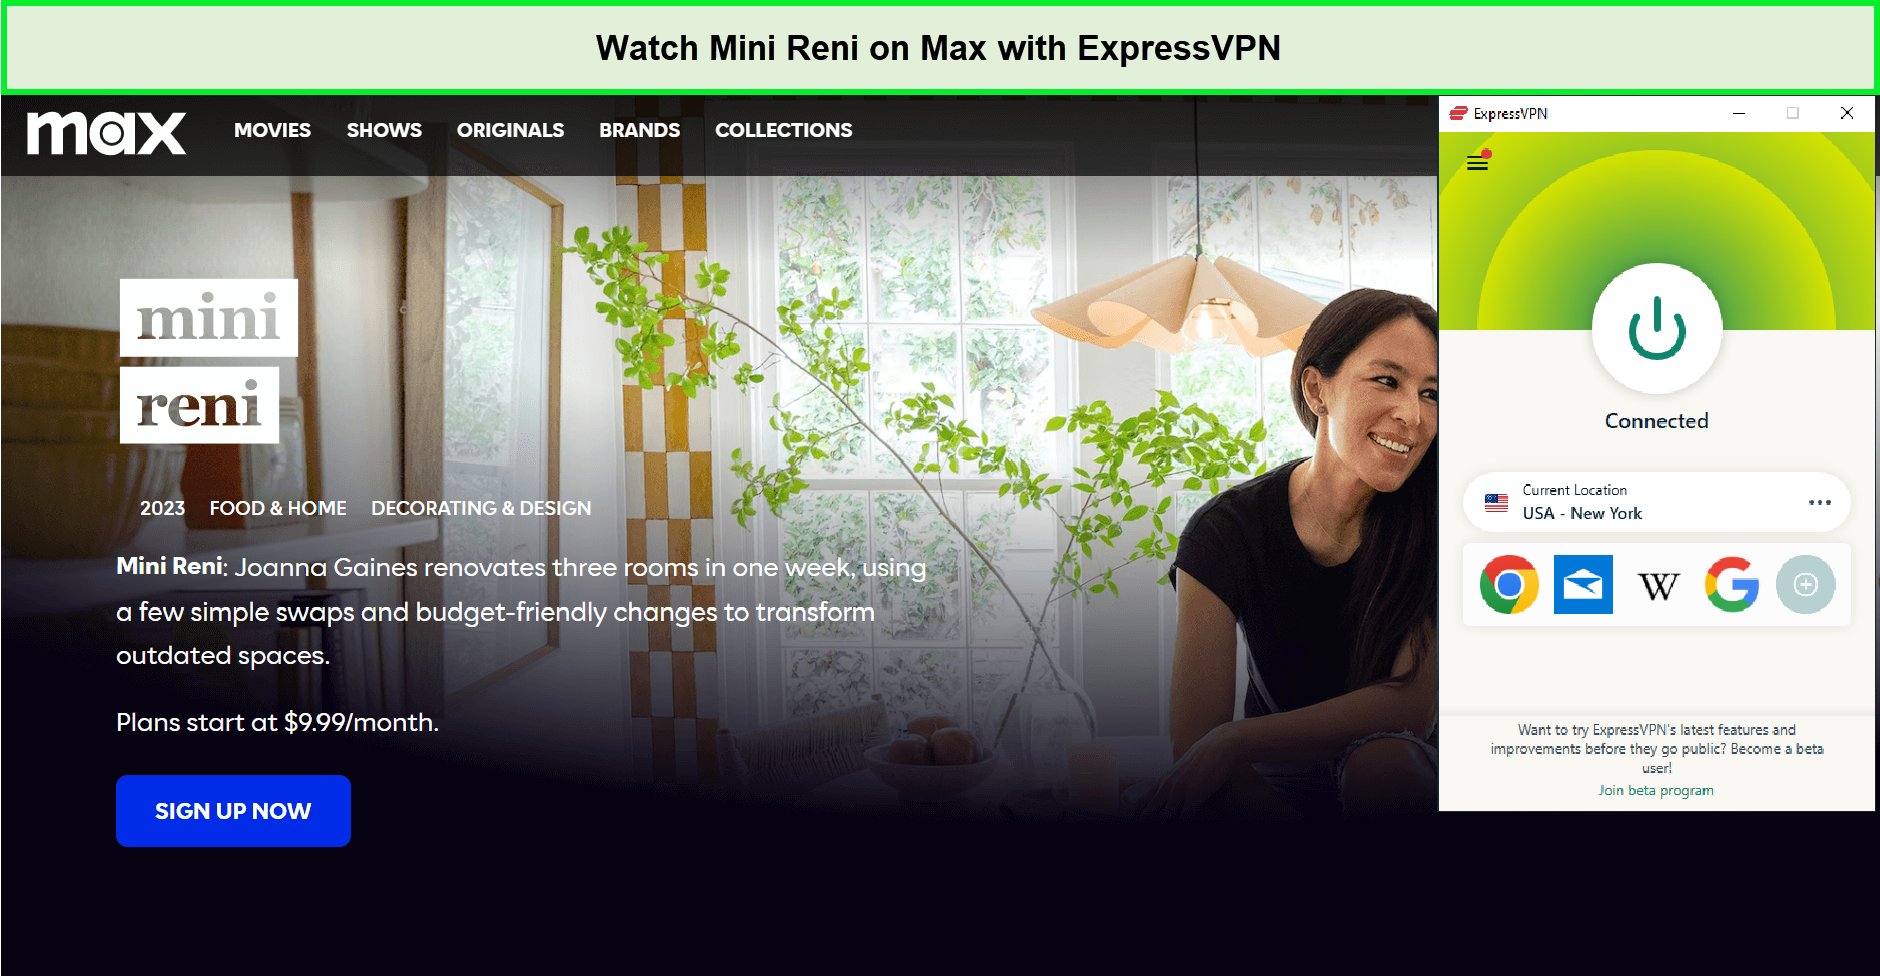 Watch-Mini-Reni-in-Hong Kong-on-Max-with-ExpressVPN